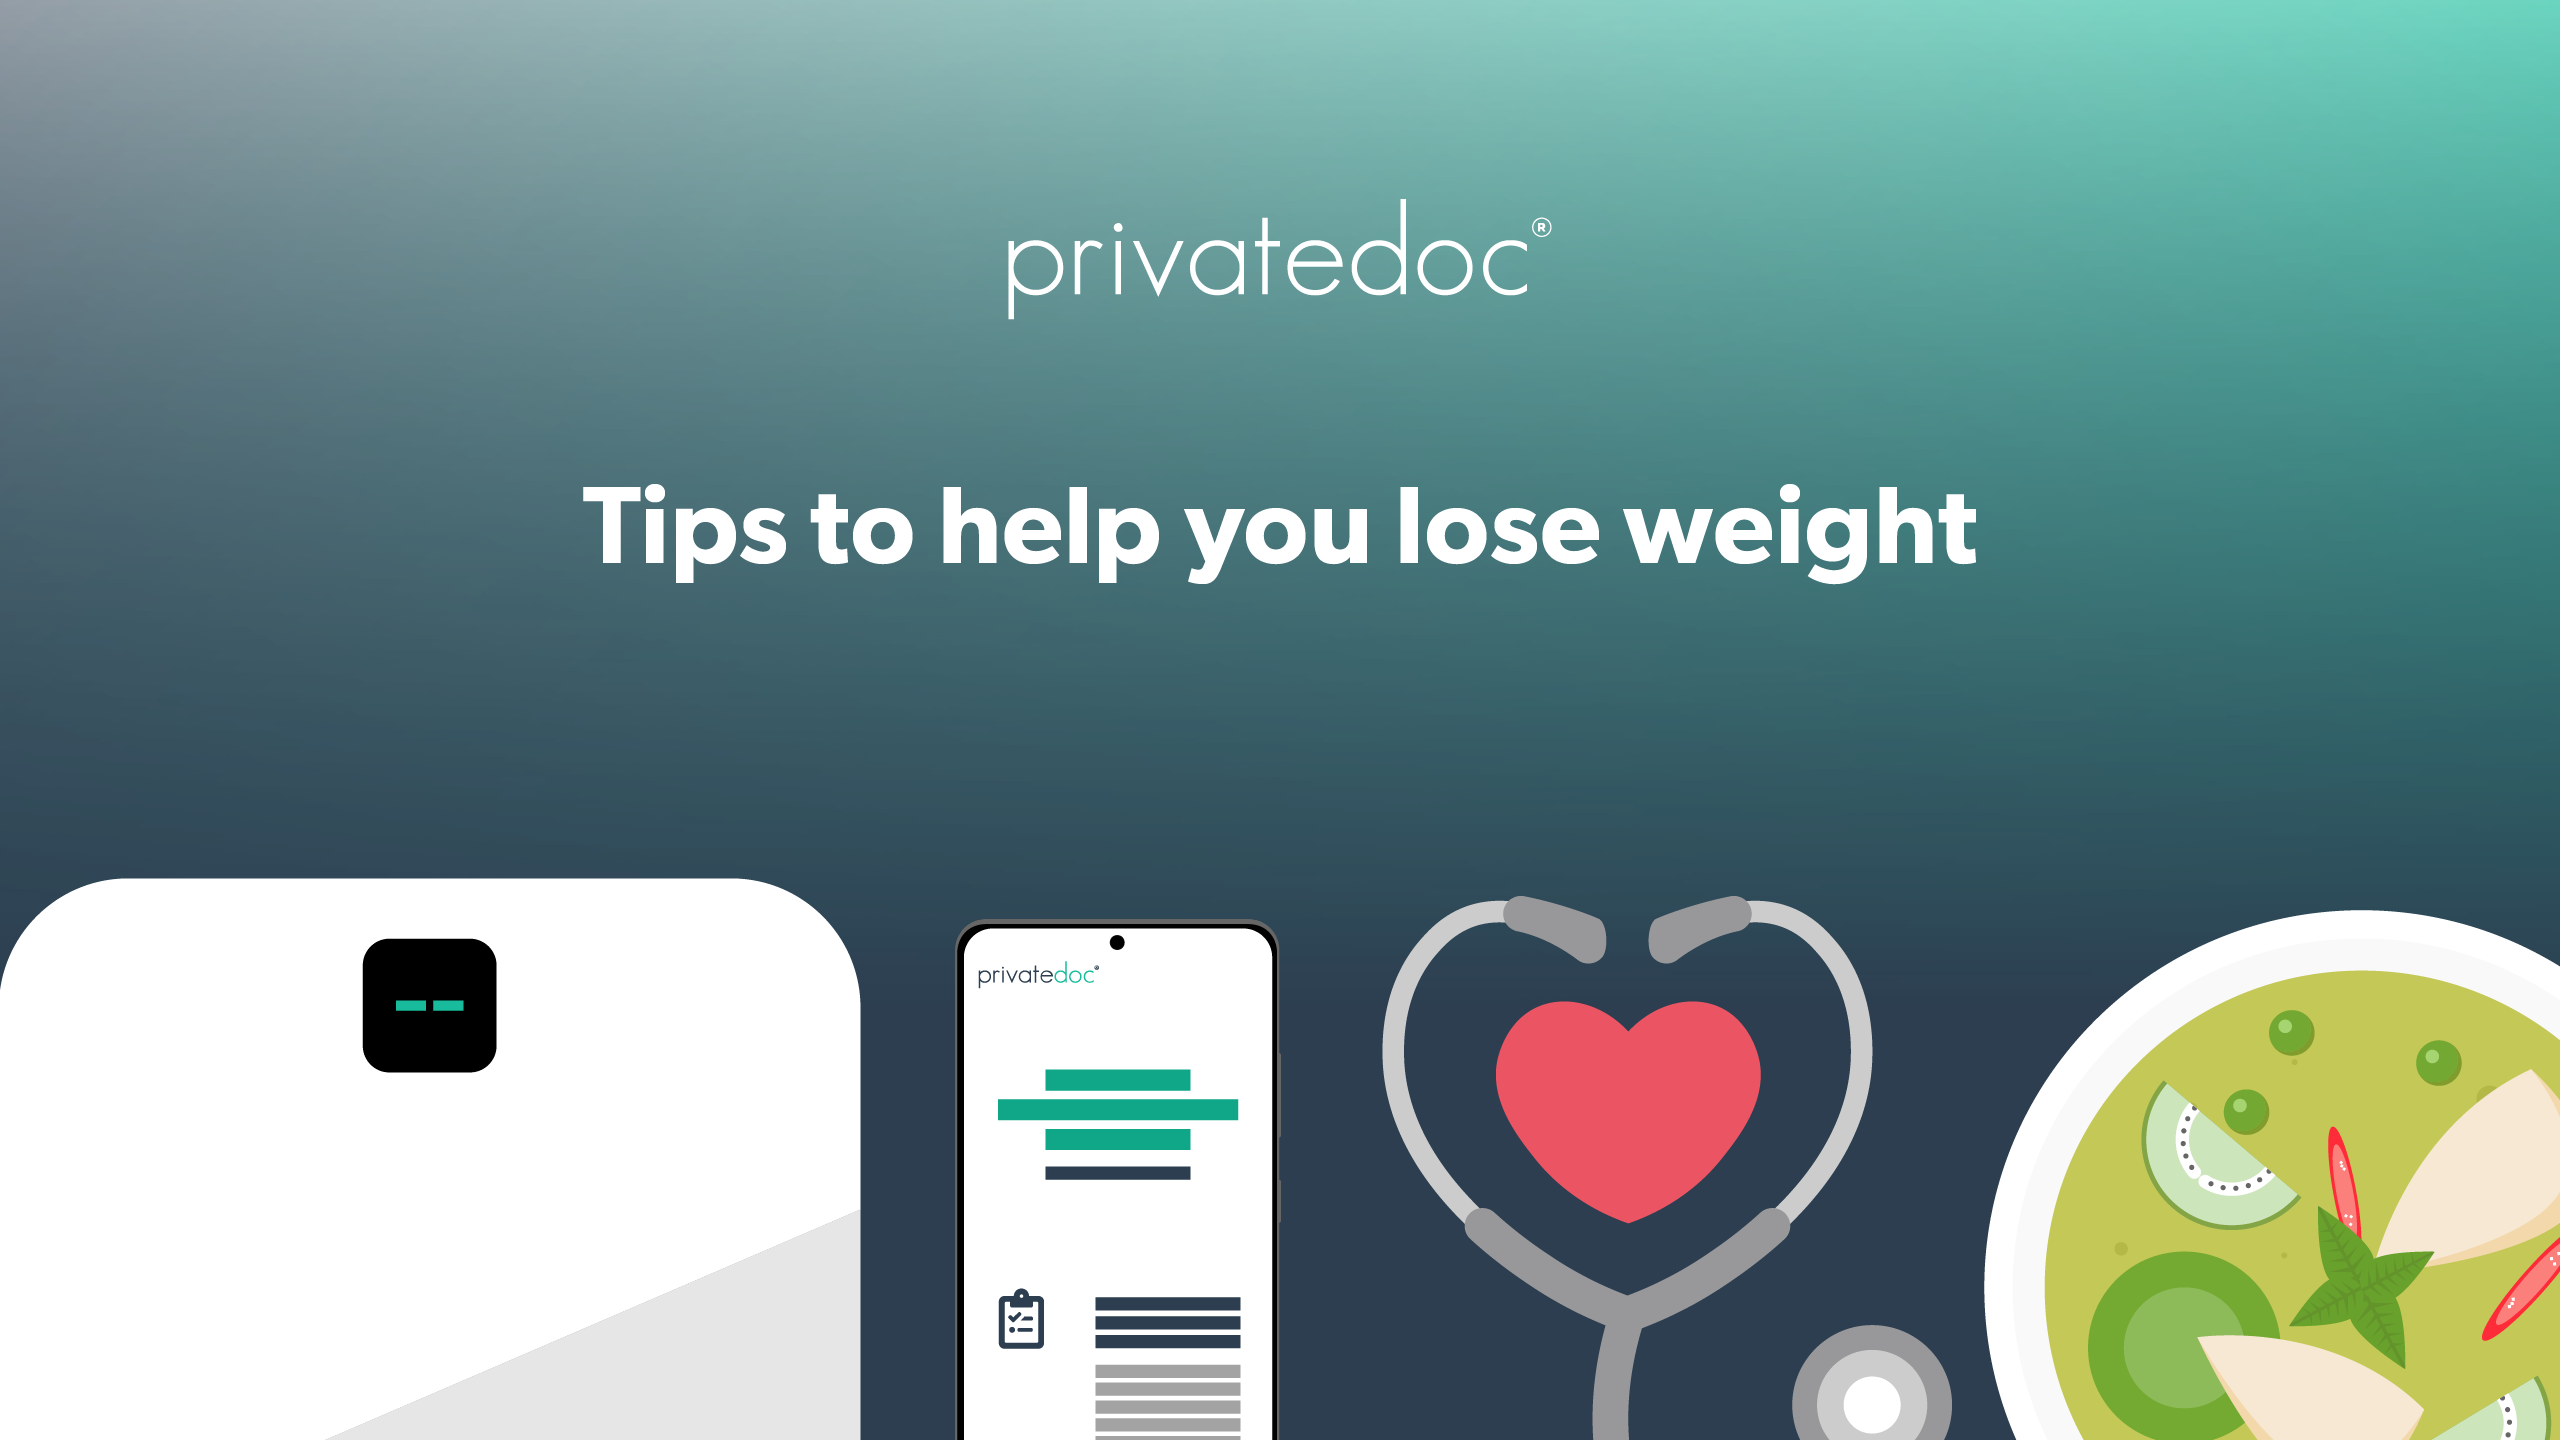 Tips to help you lose weight